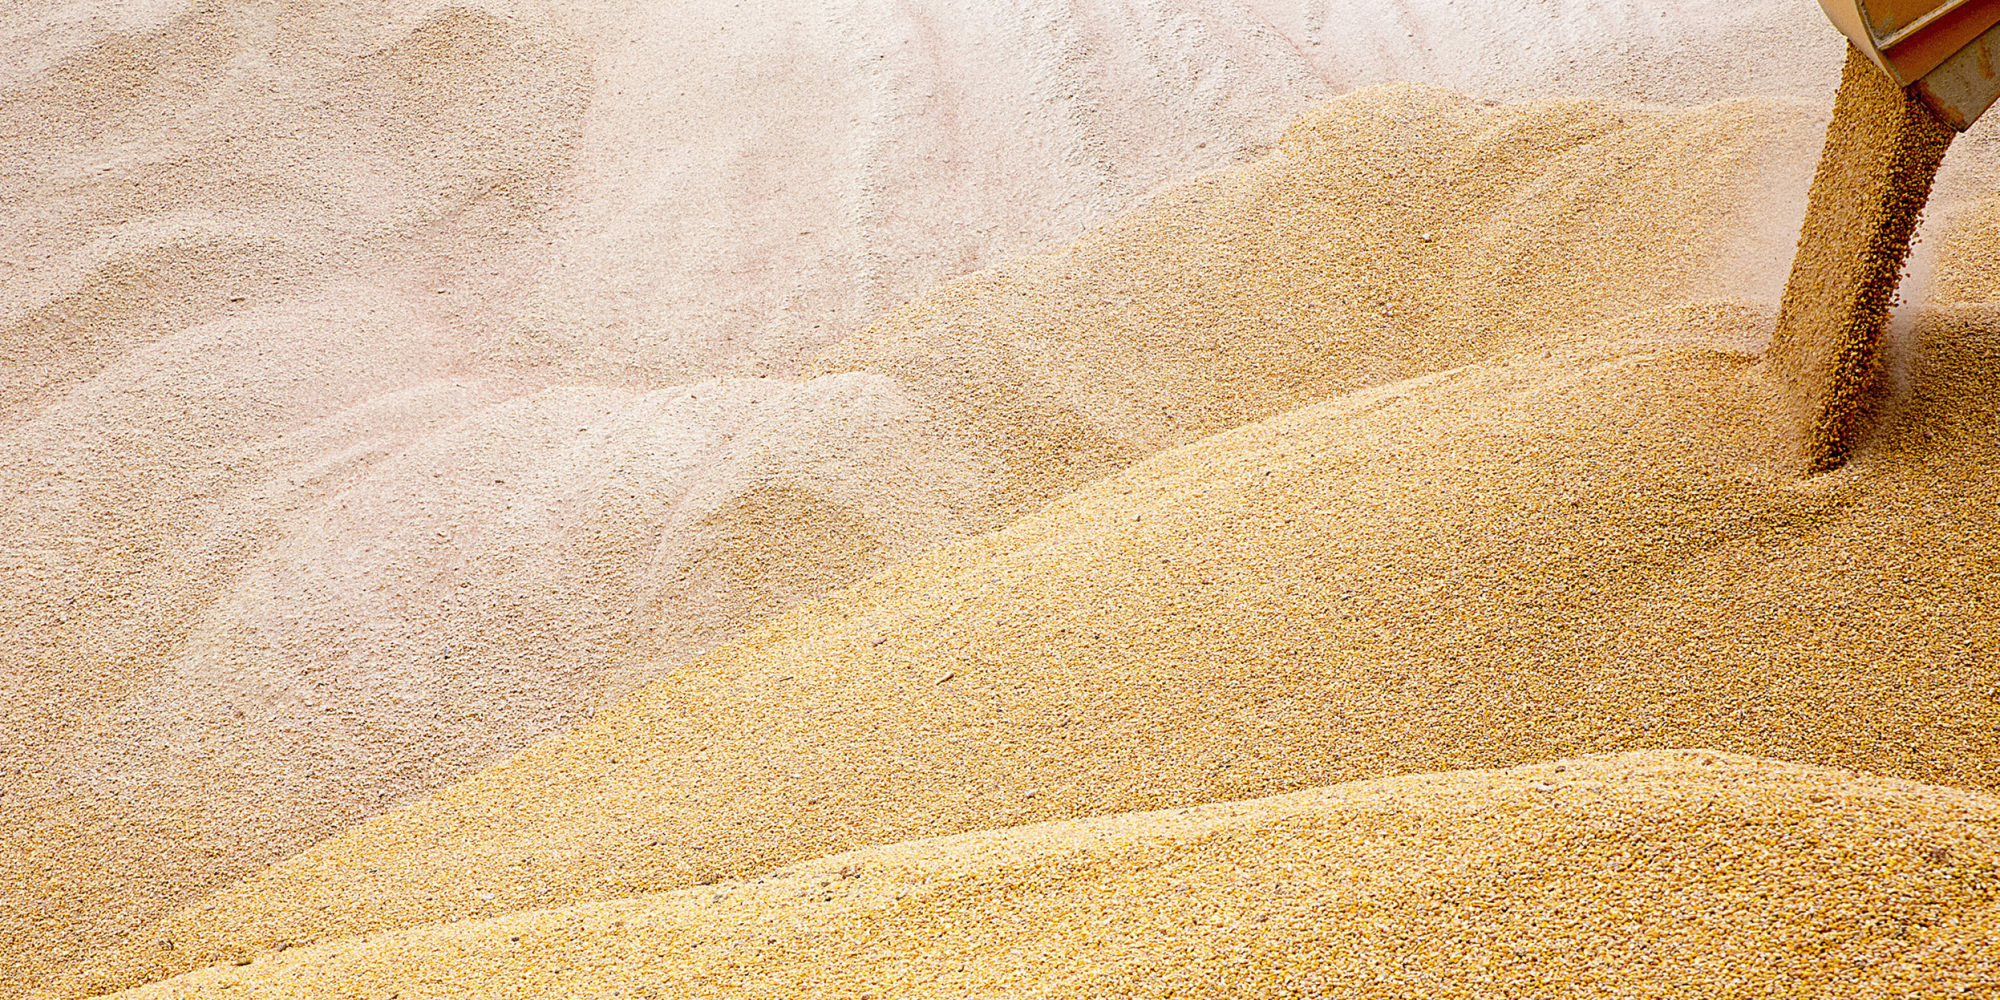 More than 14 million tons of grains are in stock in Kazakhstan